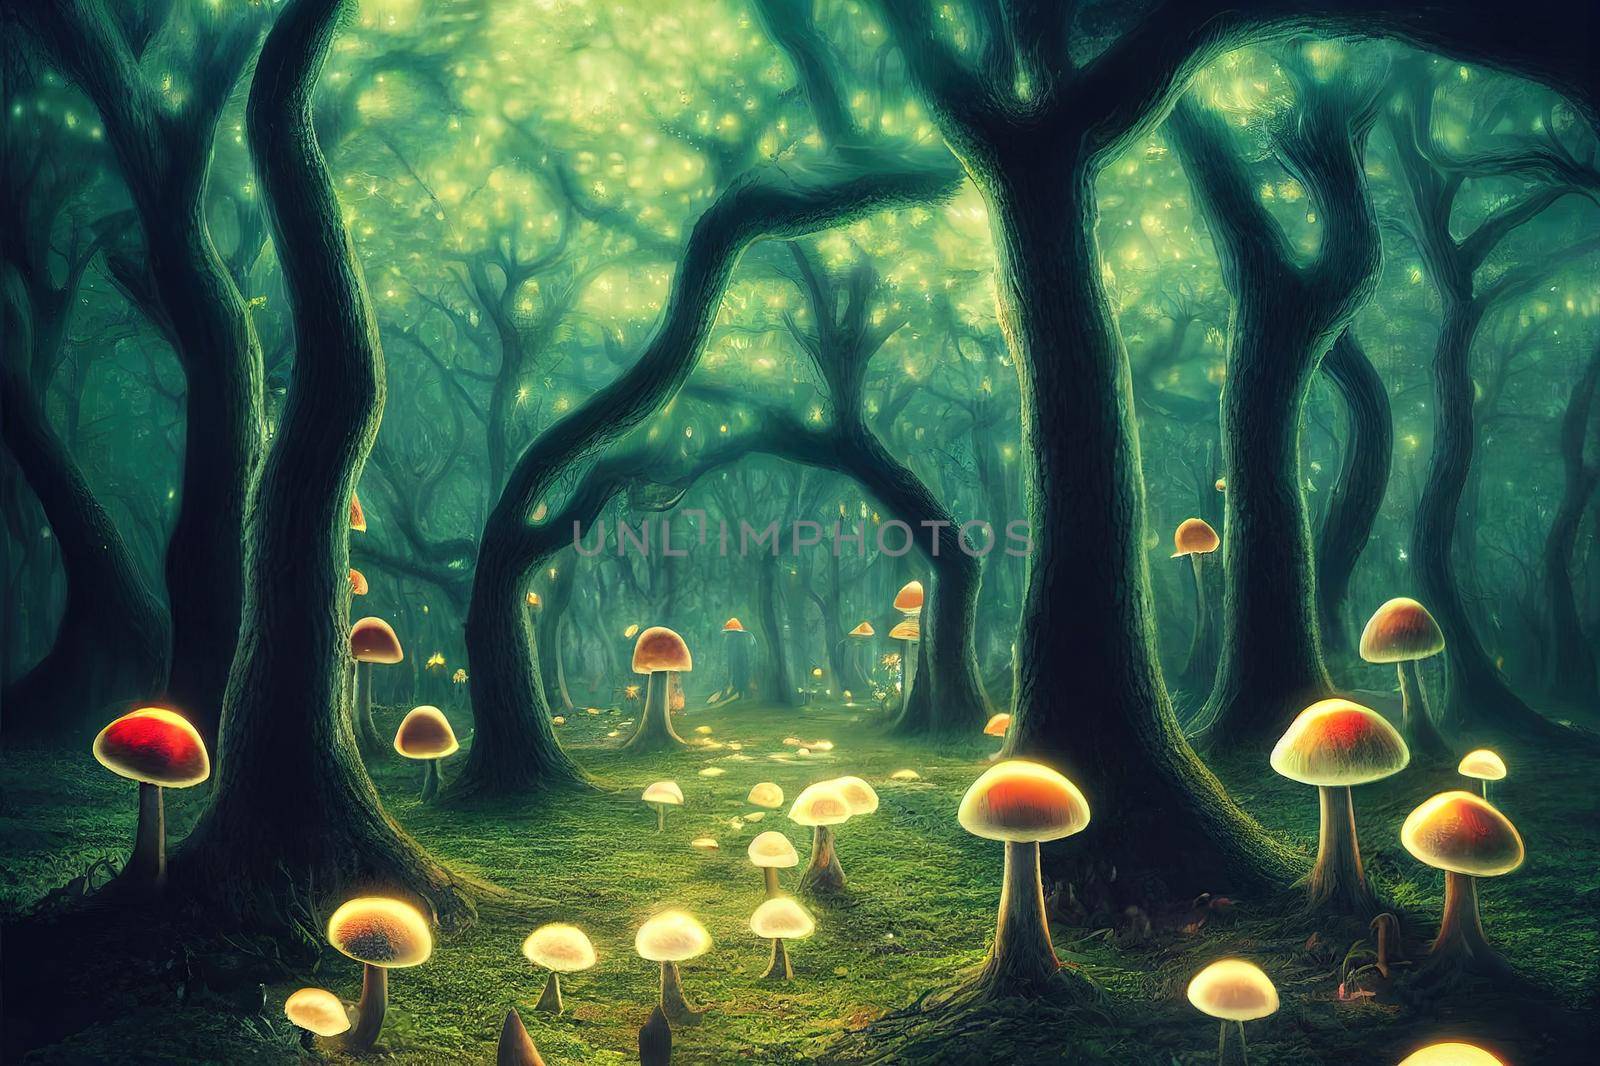 an enchanted forest at night illuminated by glowing mushrooms, fantasy, surrealism! 3d illustration. High quality illustration